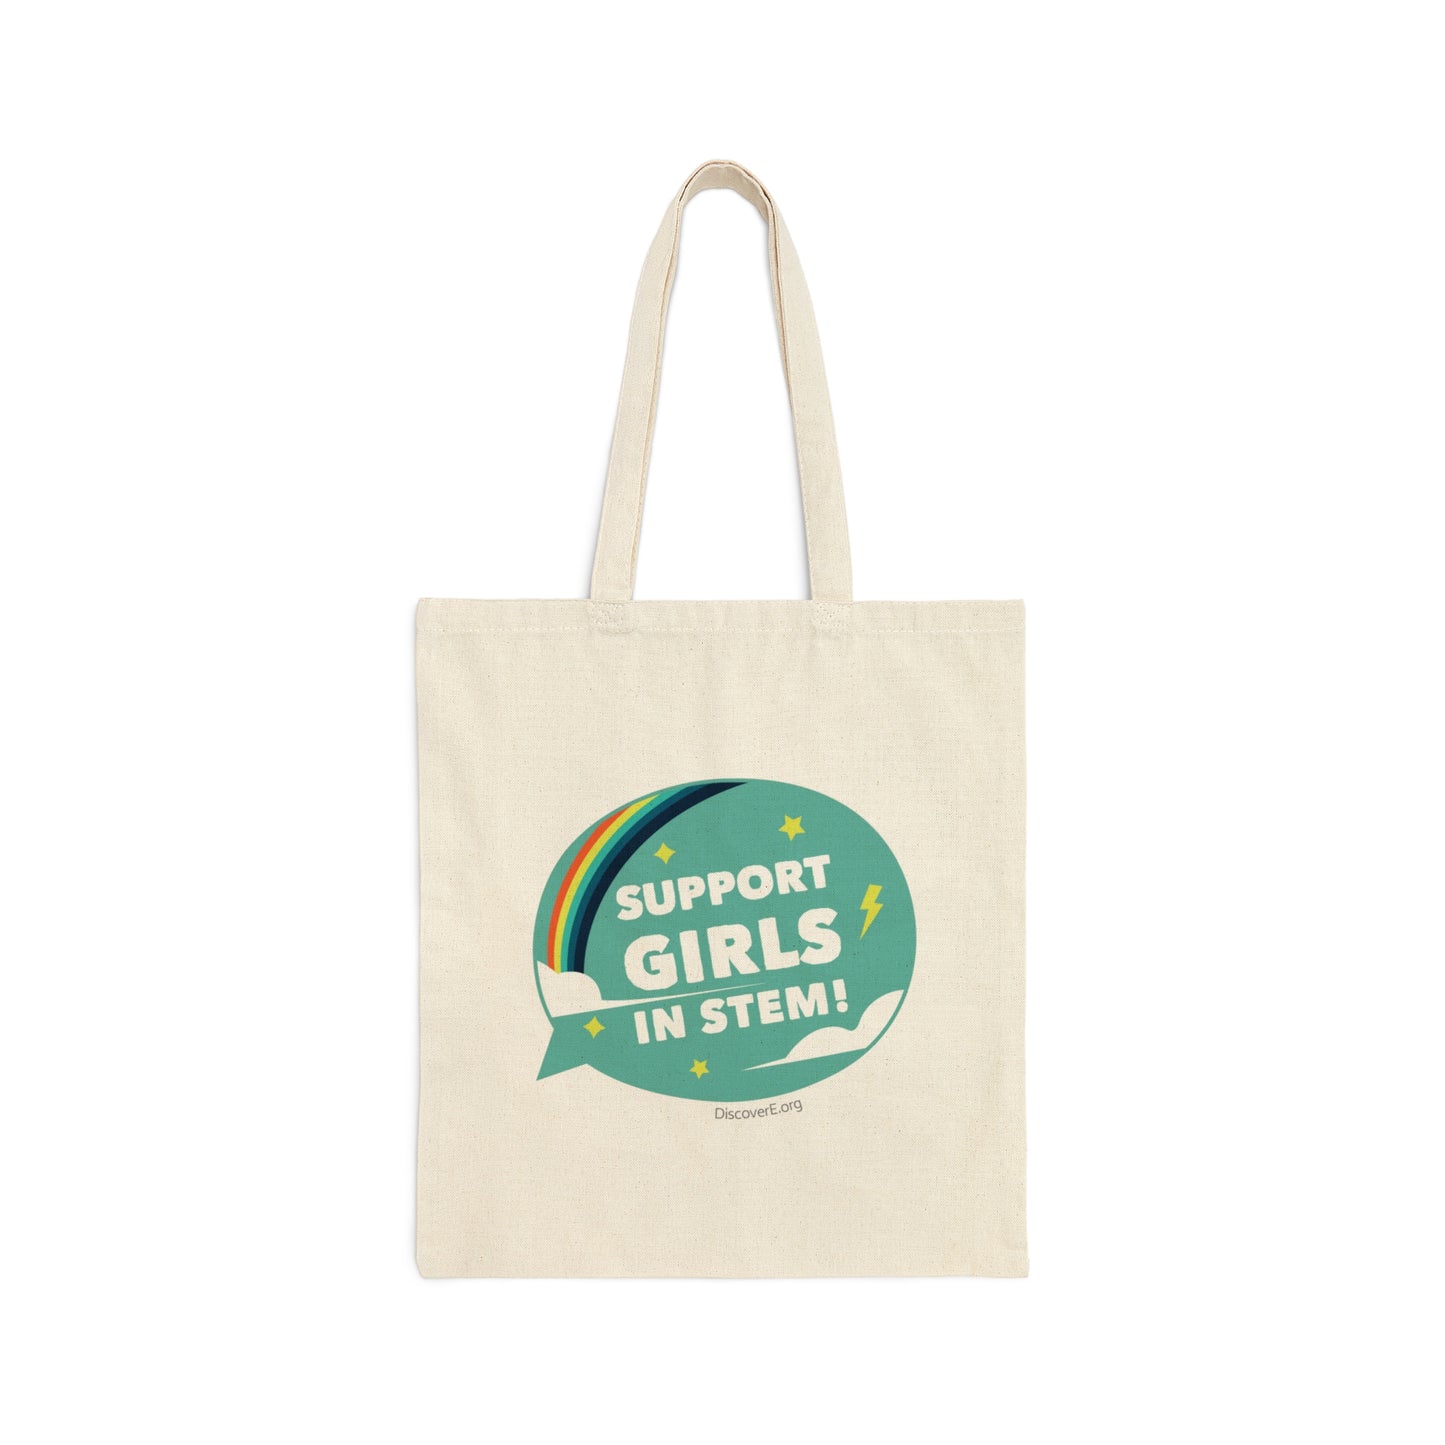 Support Girls In STEM! Cotton Tote